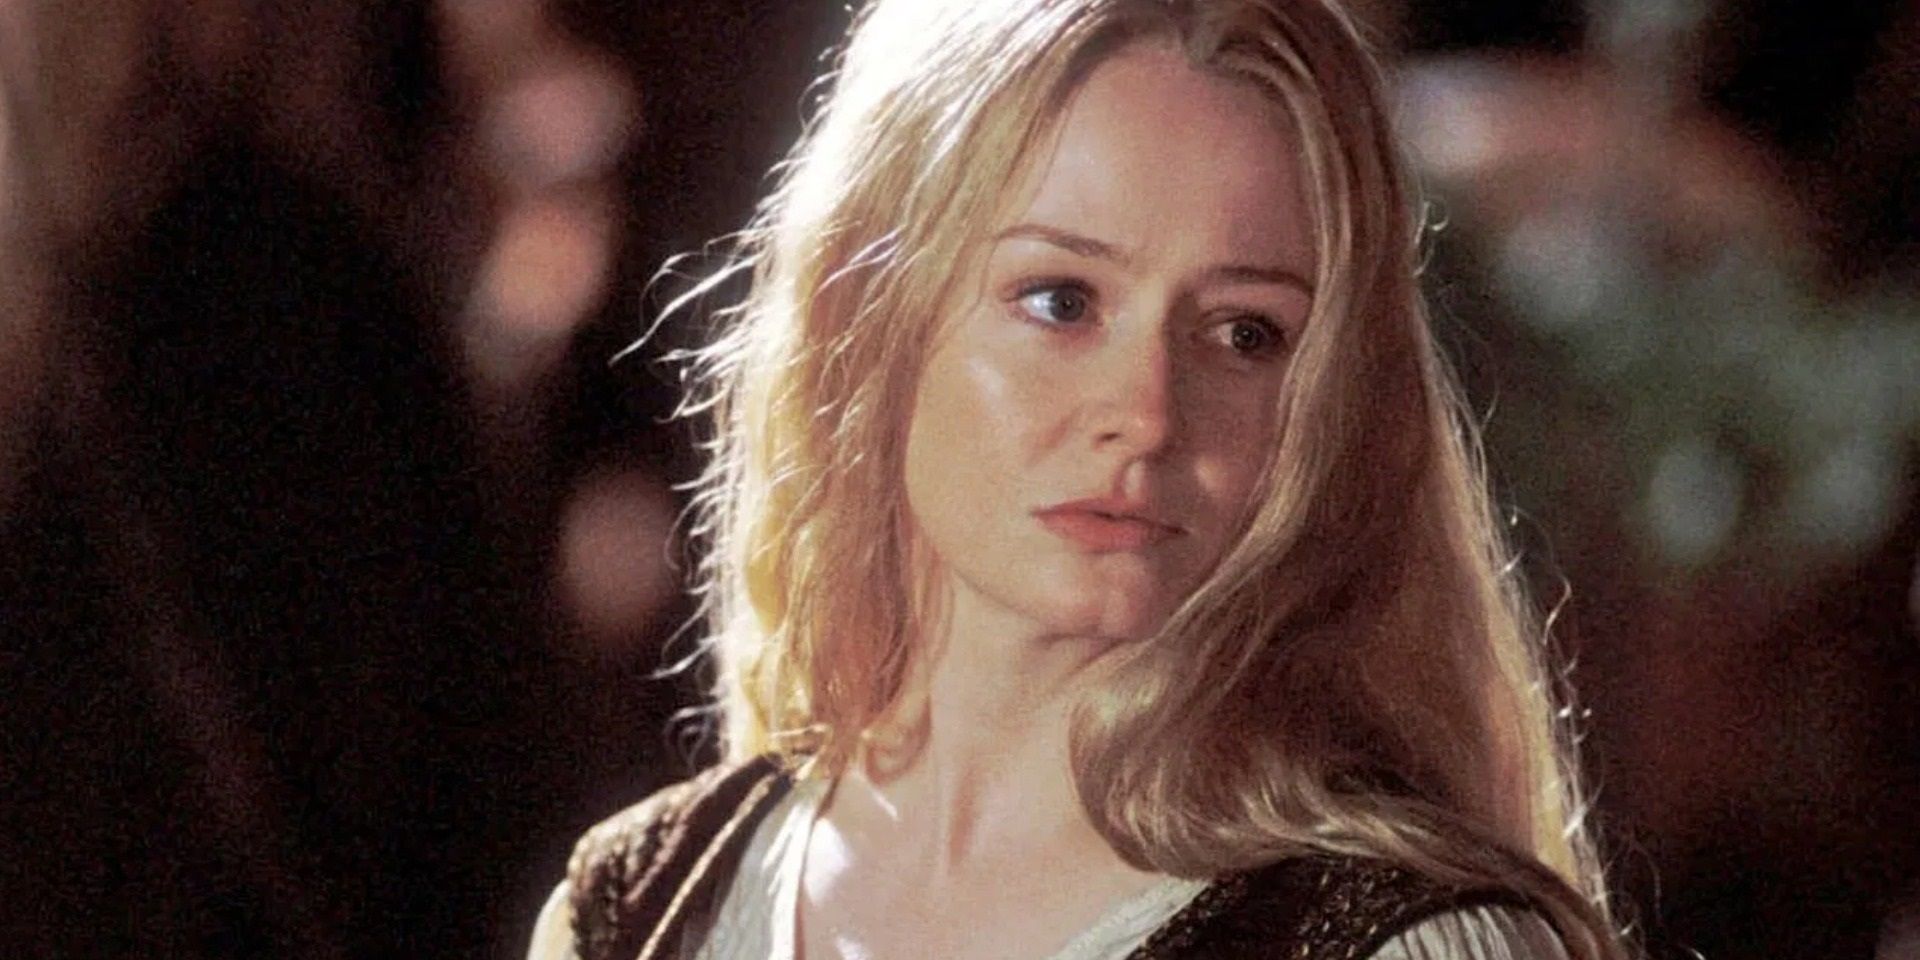 Eowyn looking over her shoulder in The Lord of the Rings